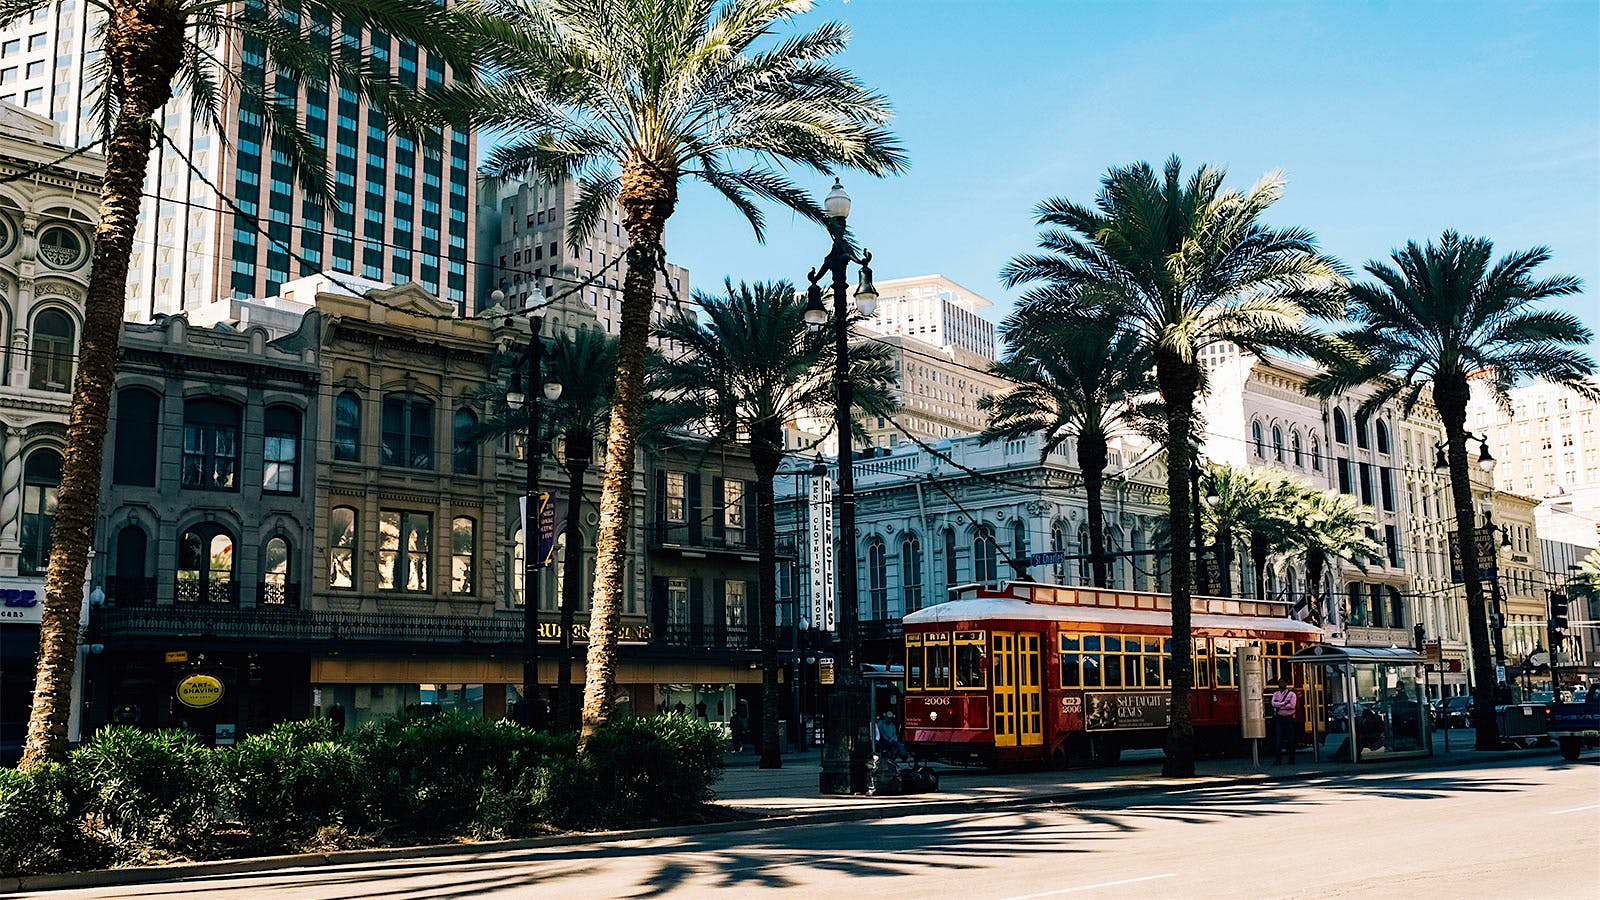 A palm tree-lined New Orleans street, with a street trolley.